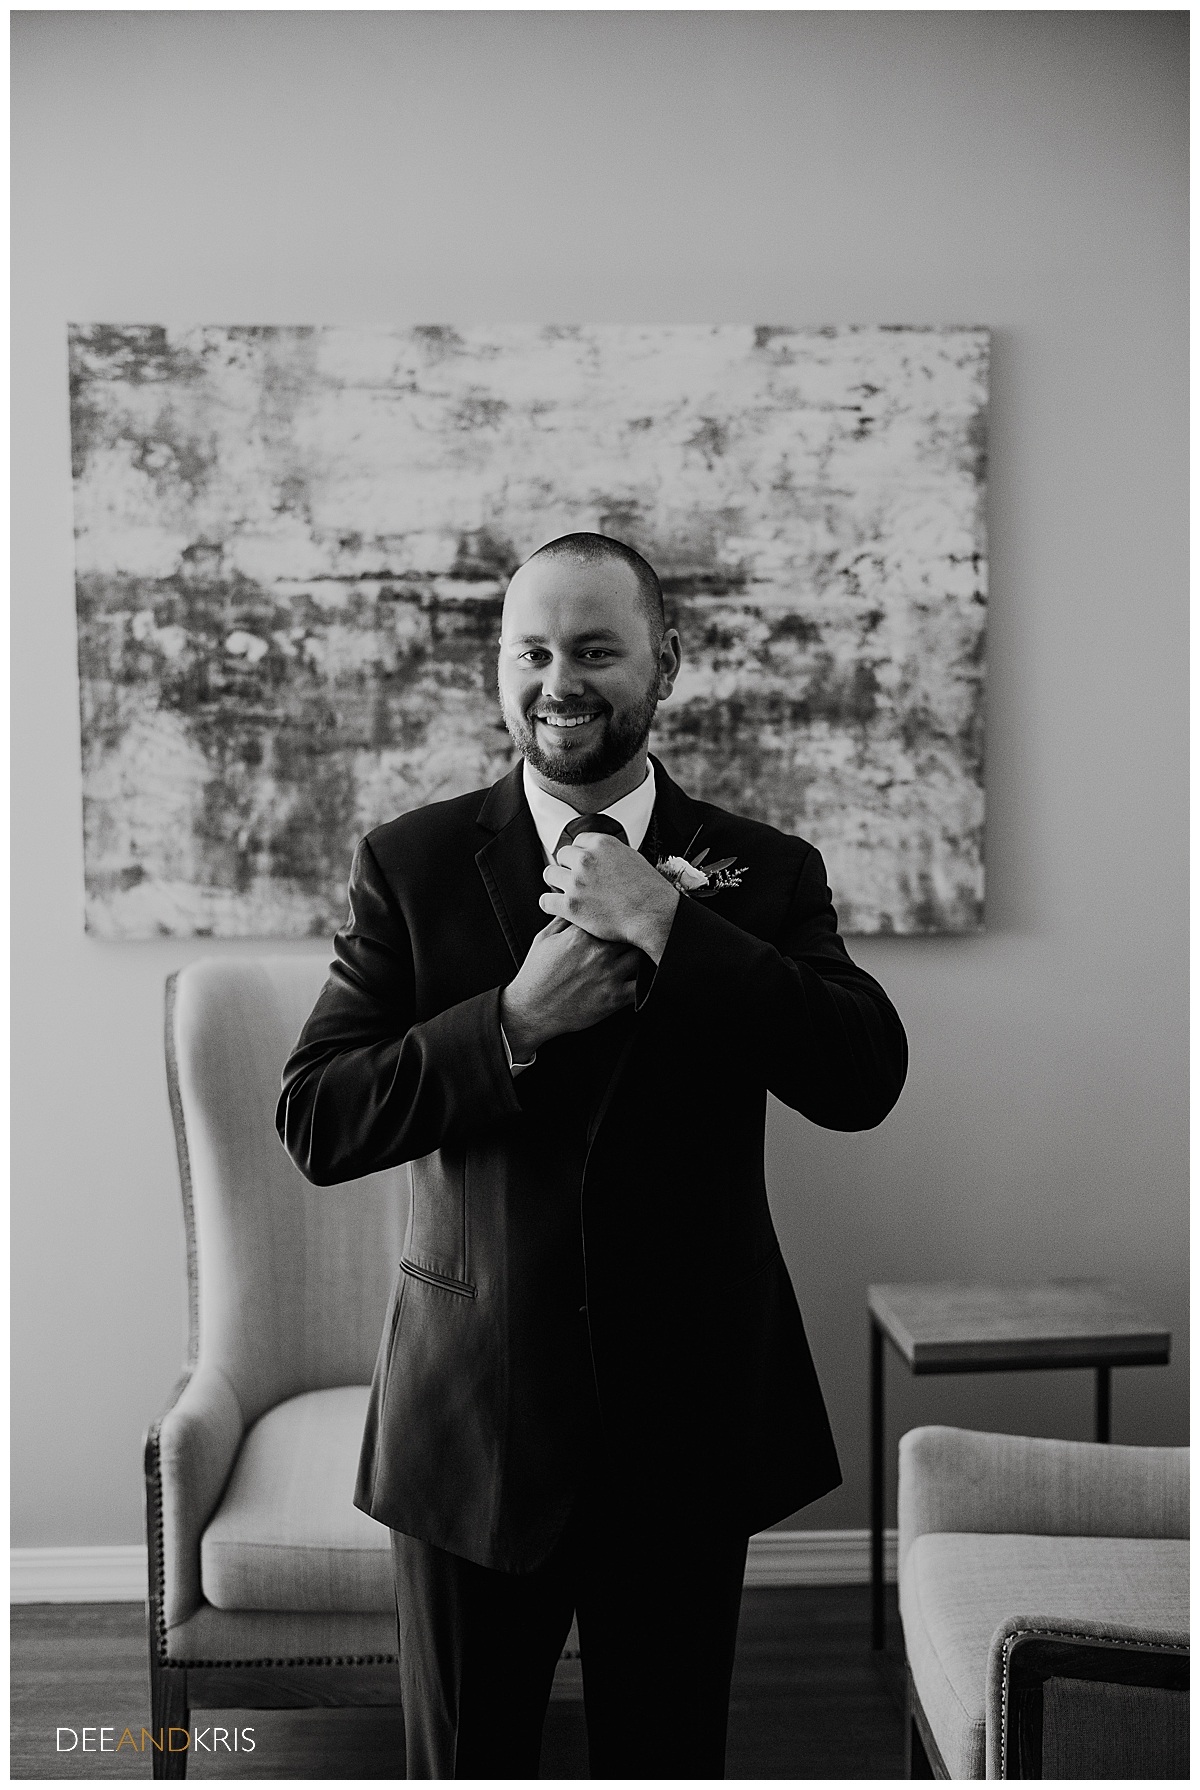 One black and white image of the groom looking at the camera while adjusting his tie.